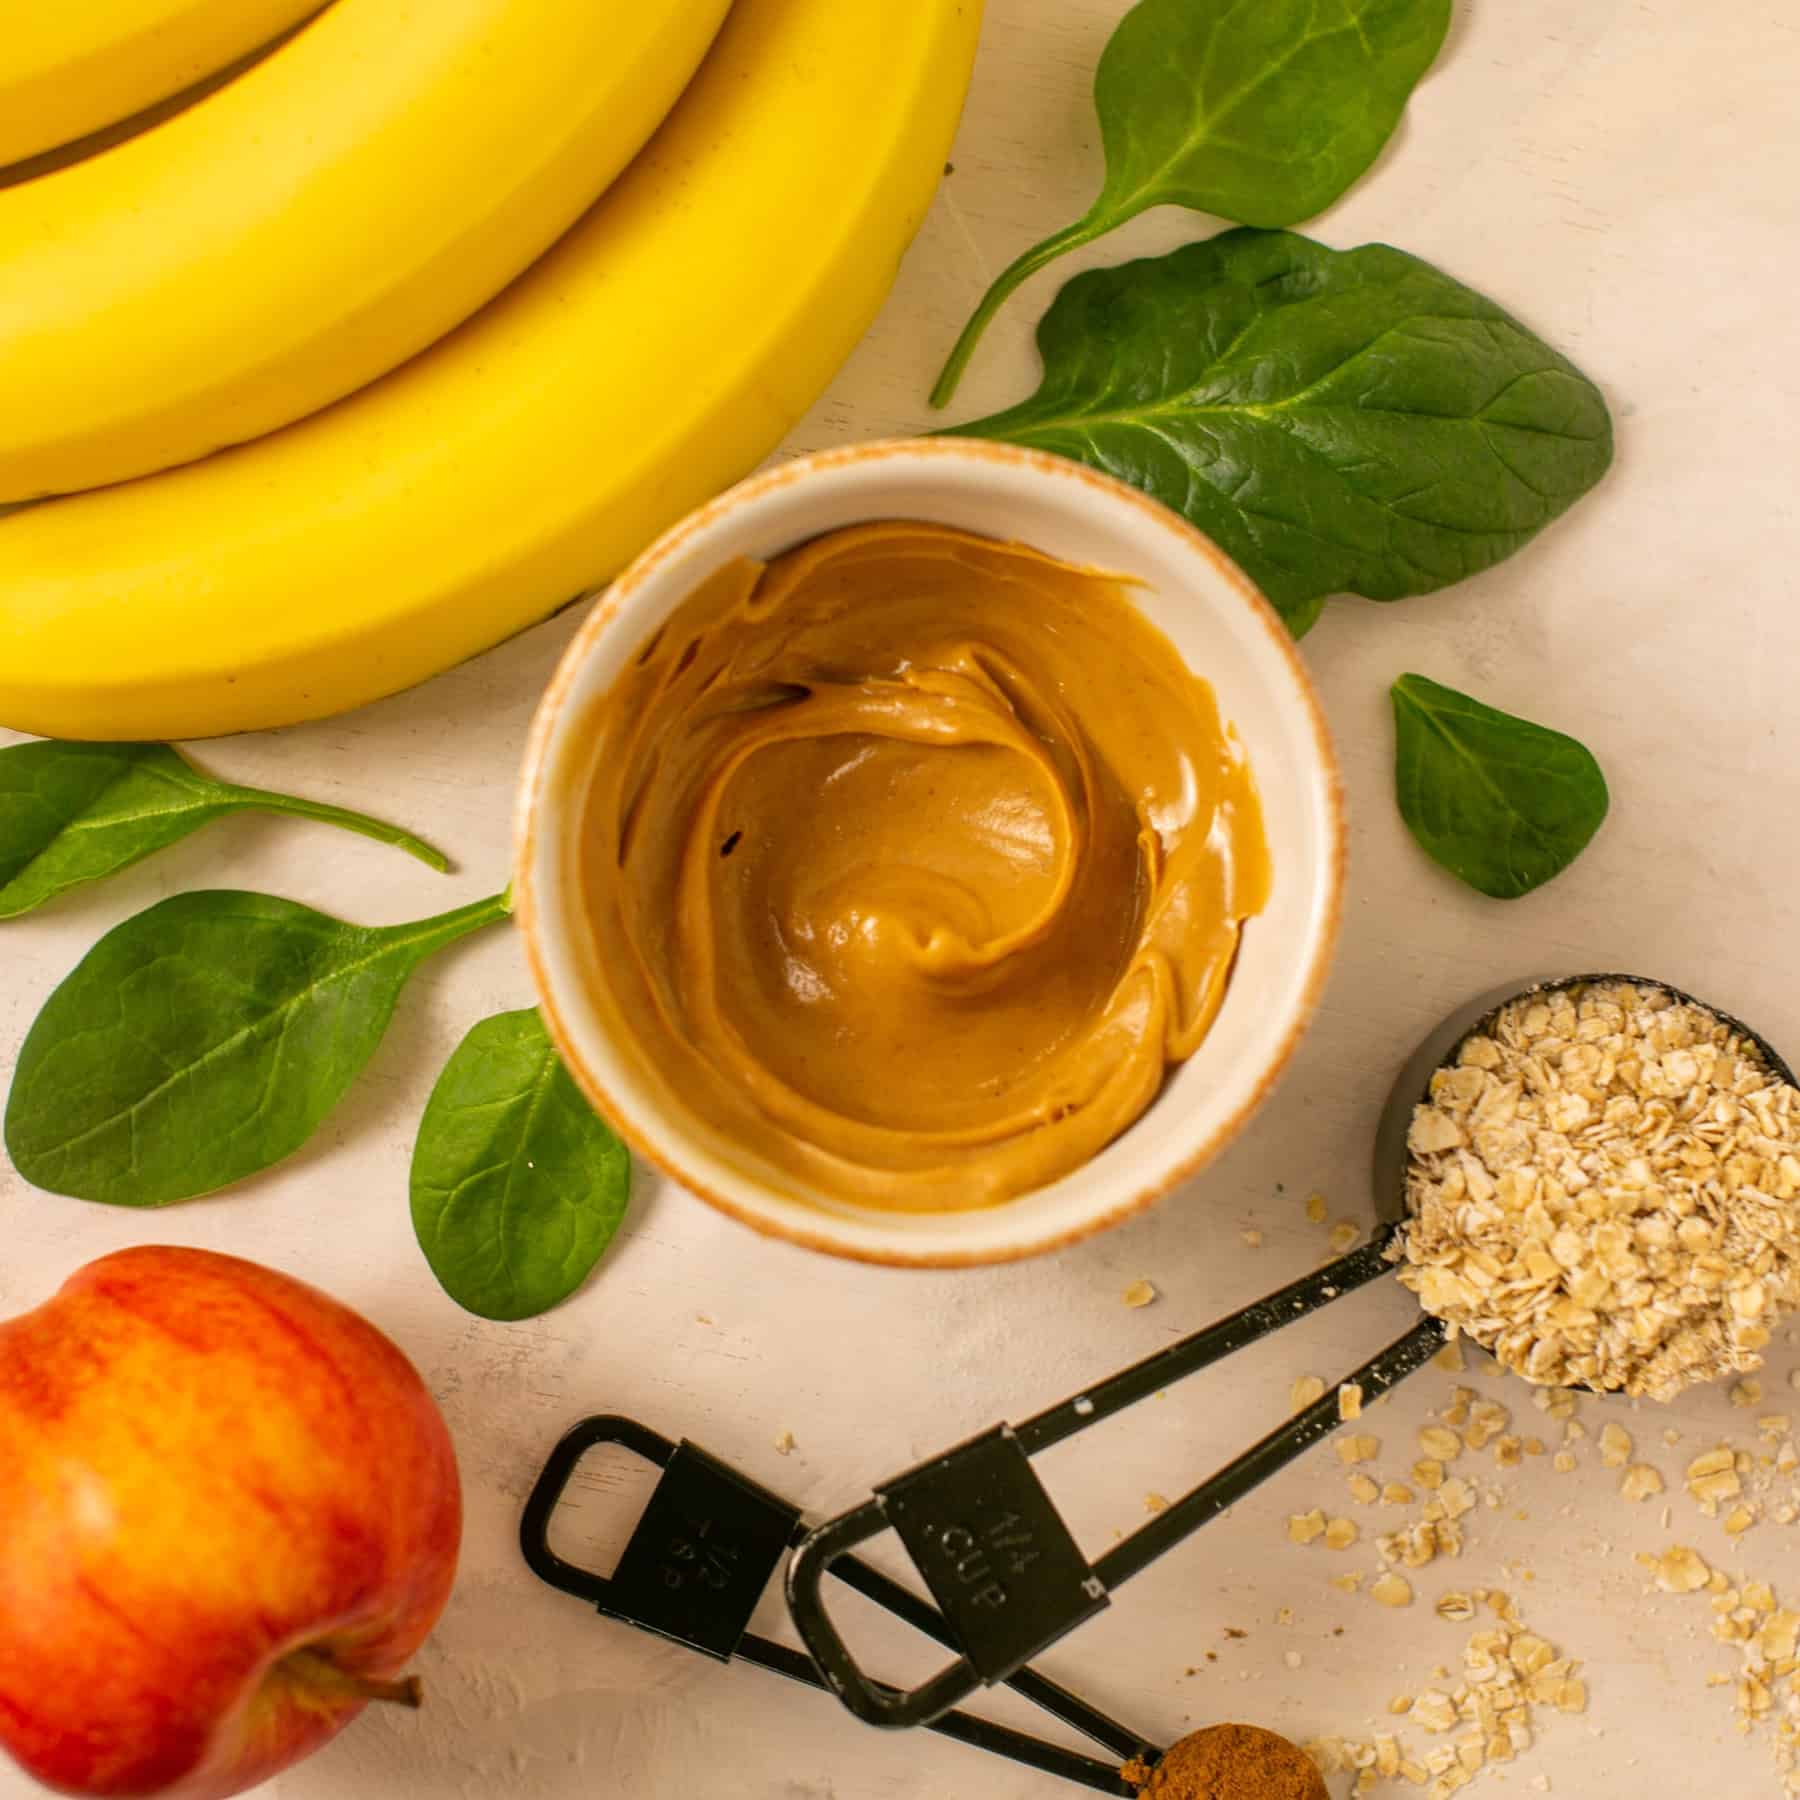 a layout of the ingredients for this healthy smoothie, including a banana, spinach, peanut butter, and oats.